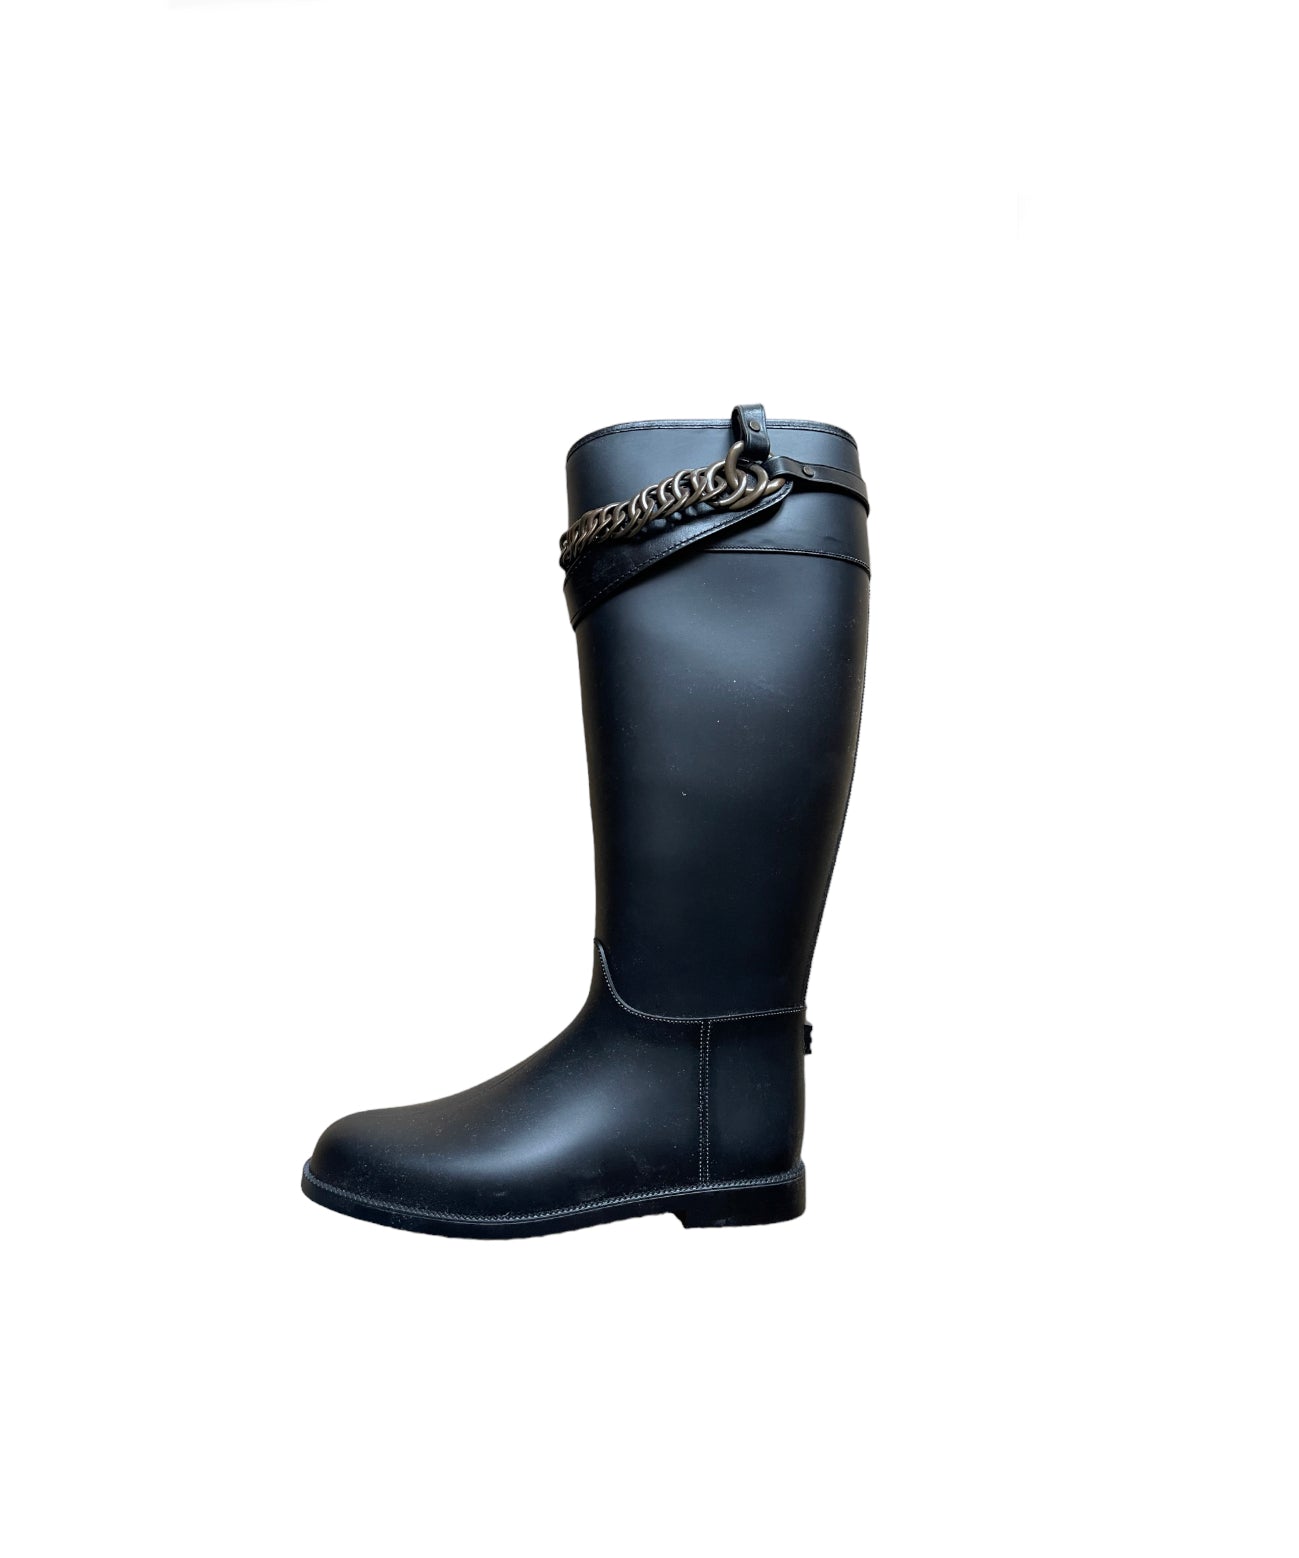 Burberry Rubber Boots - new